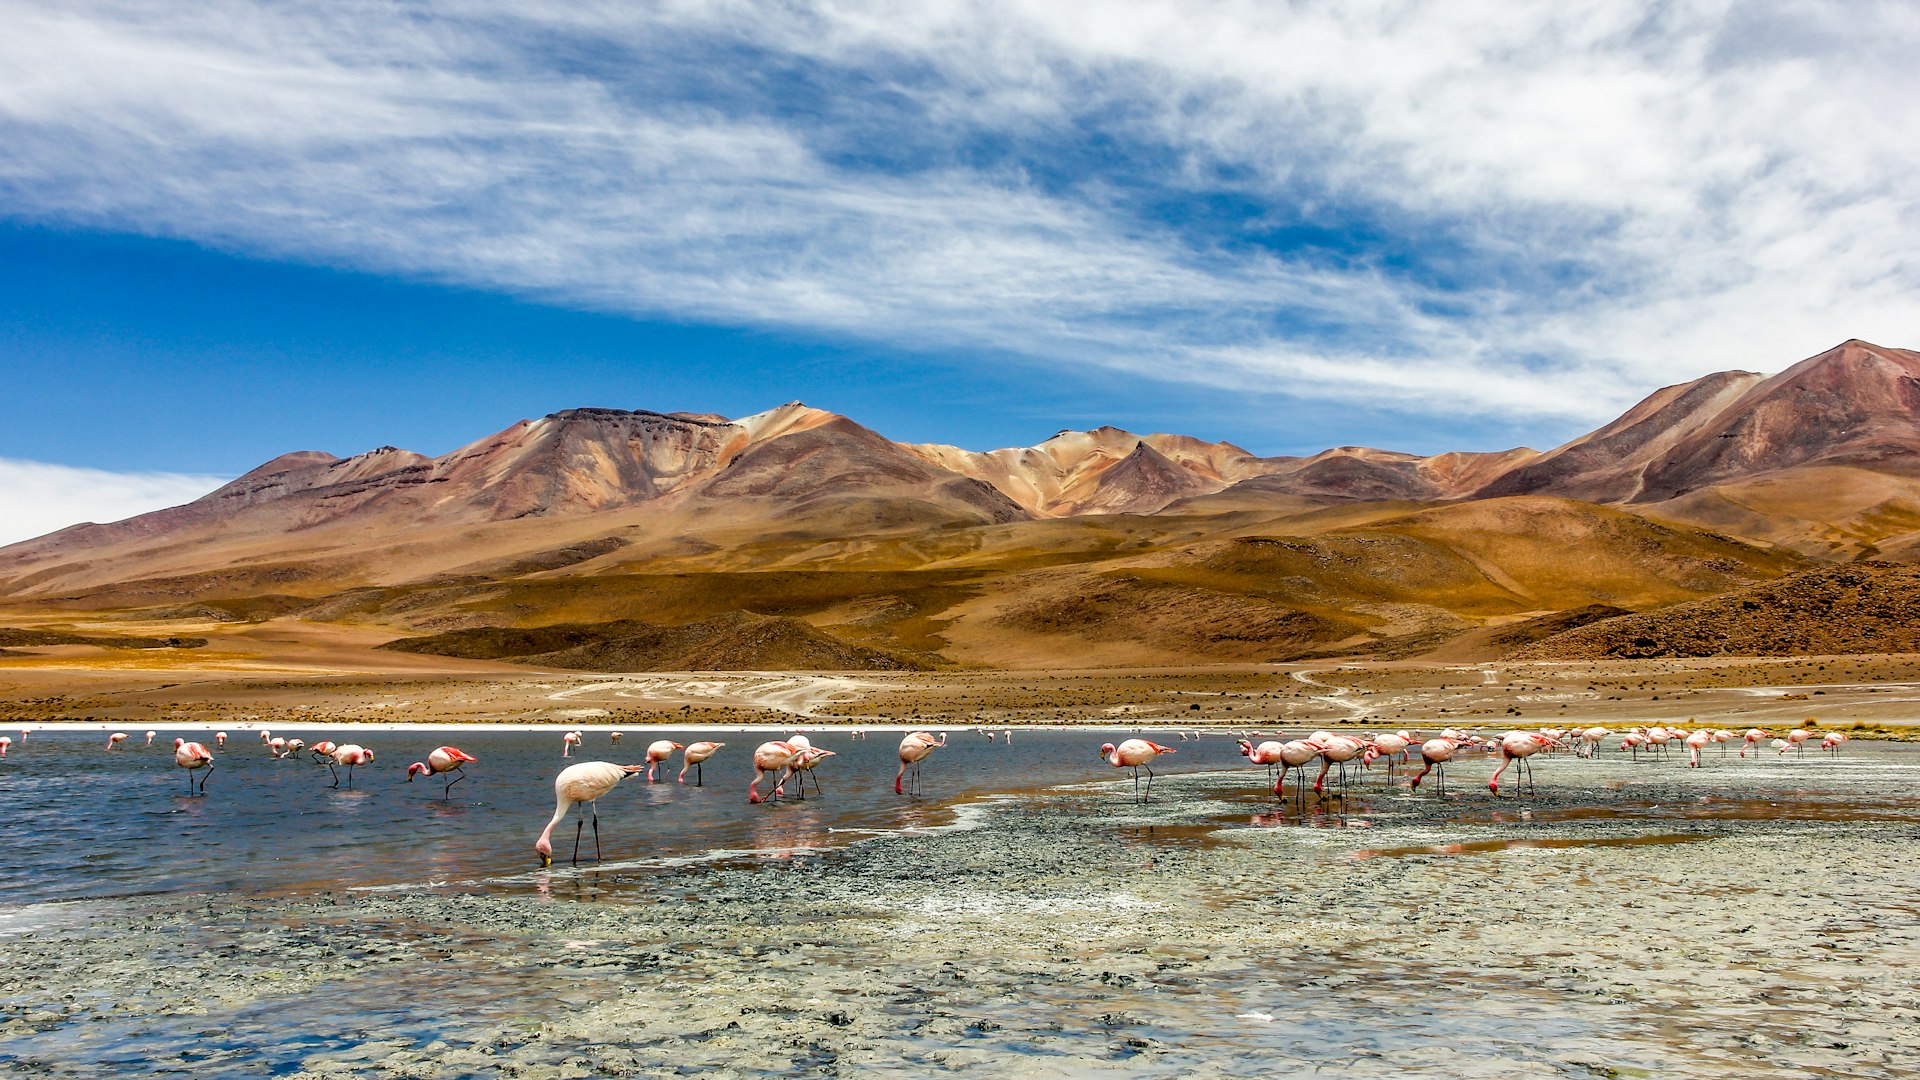 Flamingos on a lake in Southern Bolivia